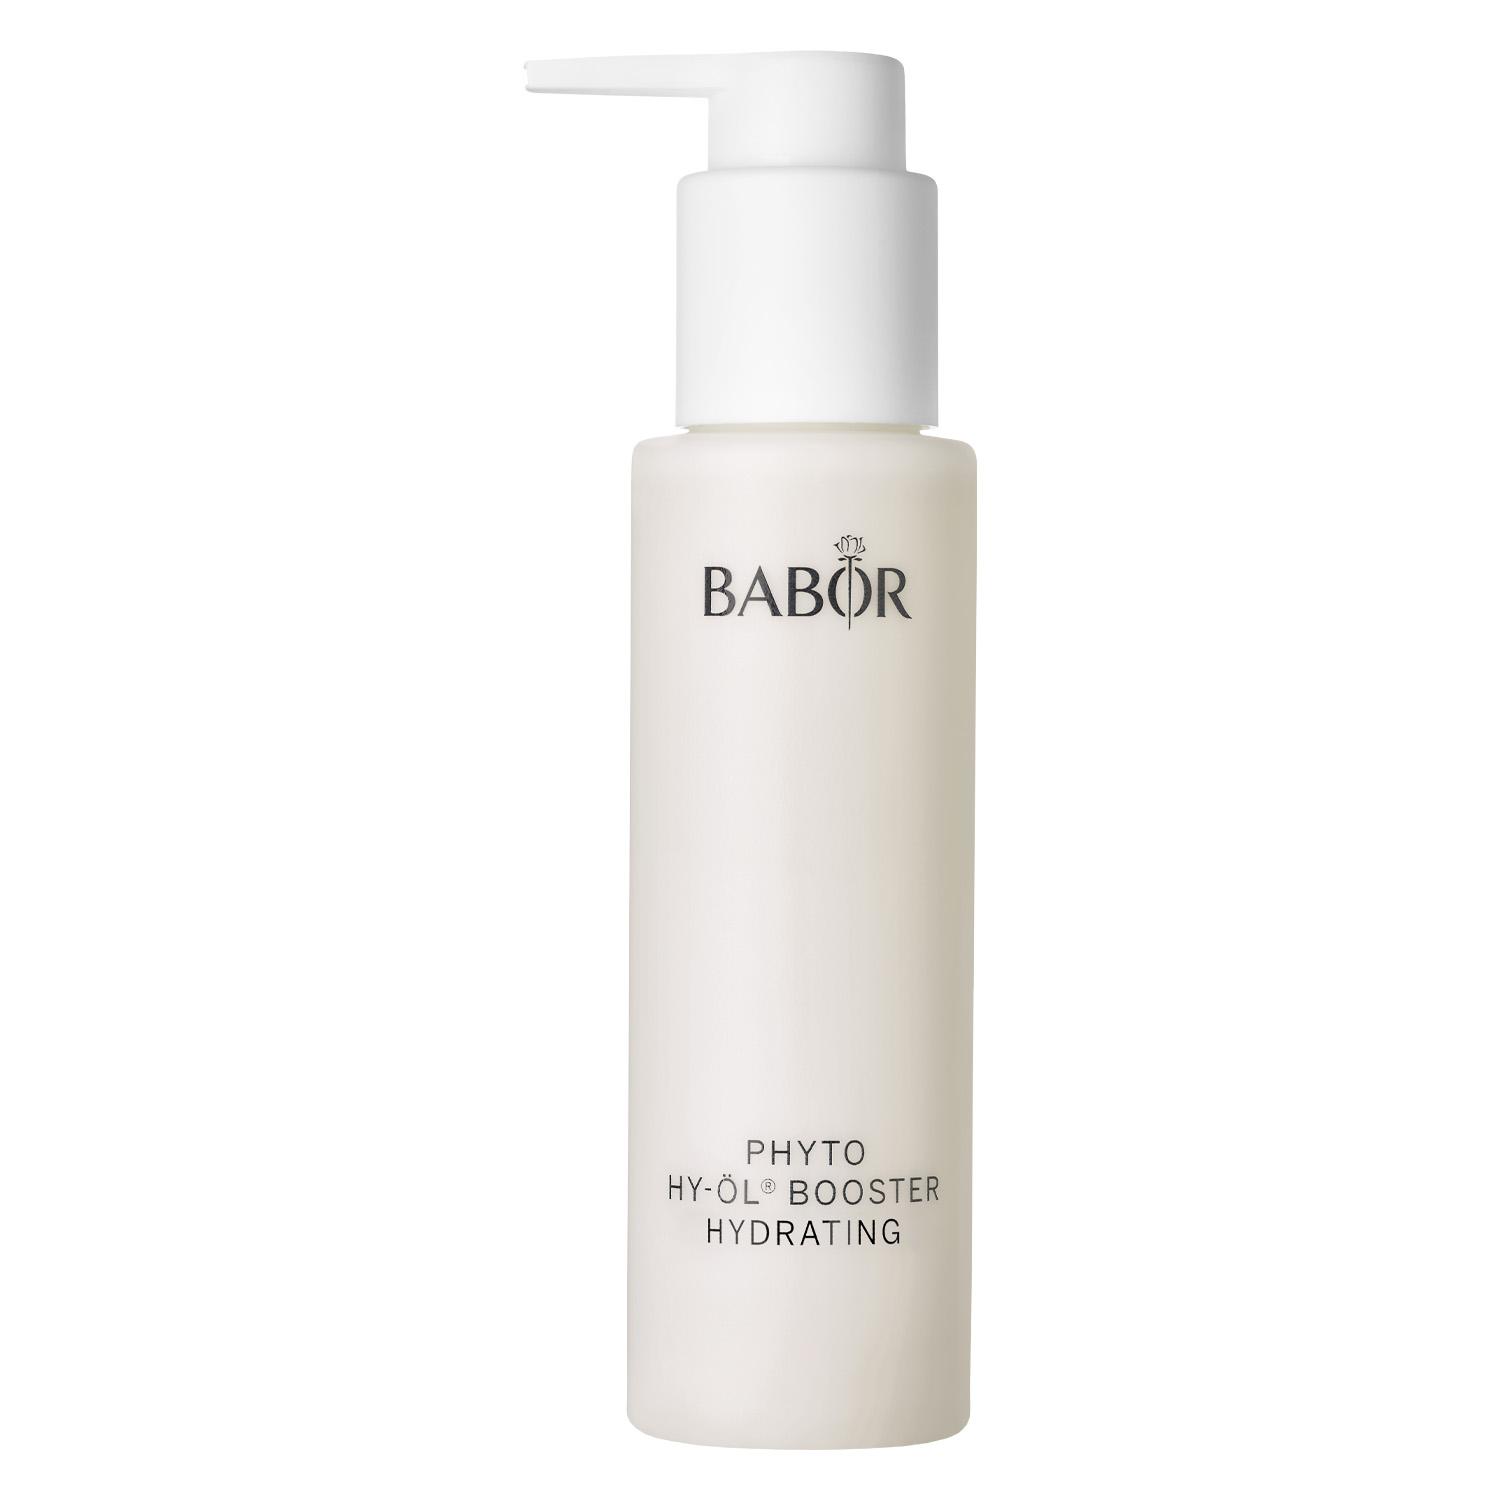 BABOR CLEANSING - Phyto HY-ÖL® Booster Hydrating